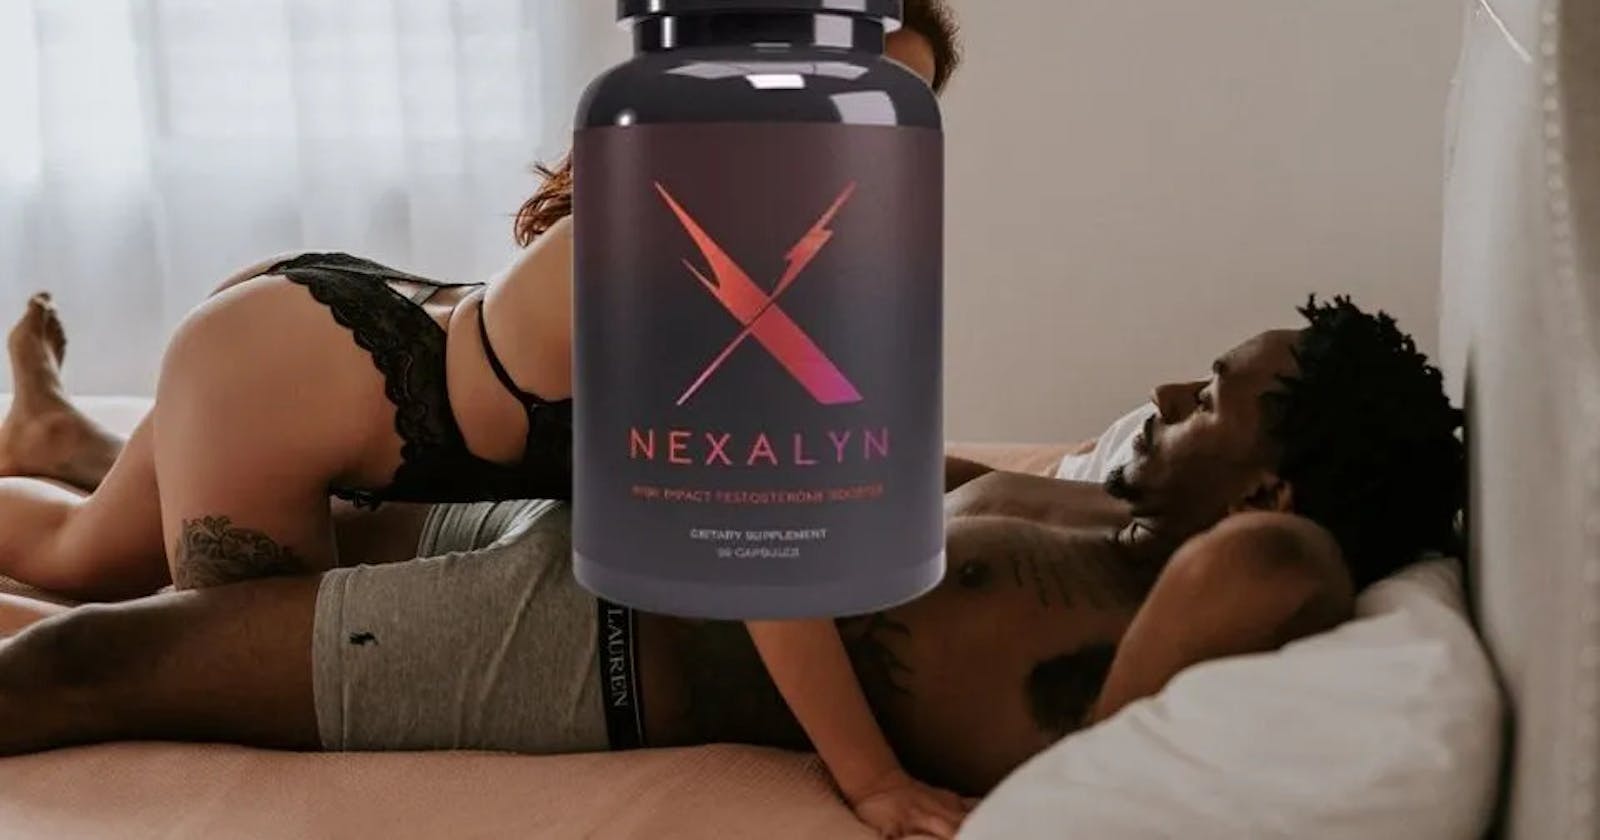 Nexalyn Testosterone Booster will revolutionize your sex life. Harder, longer erections! More sexual enjoyment!